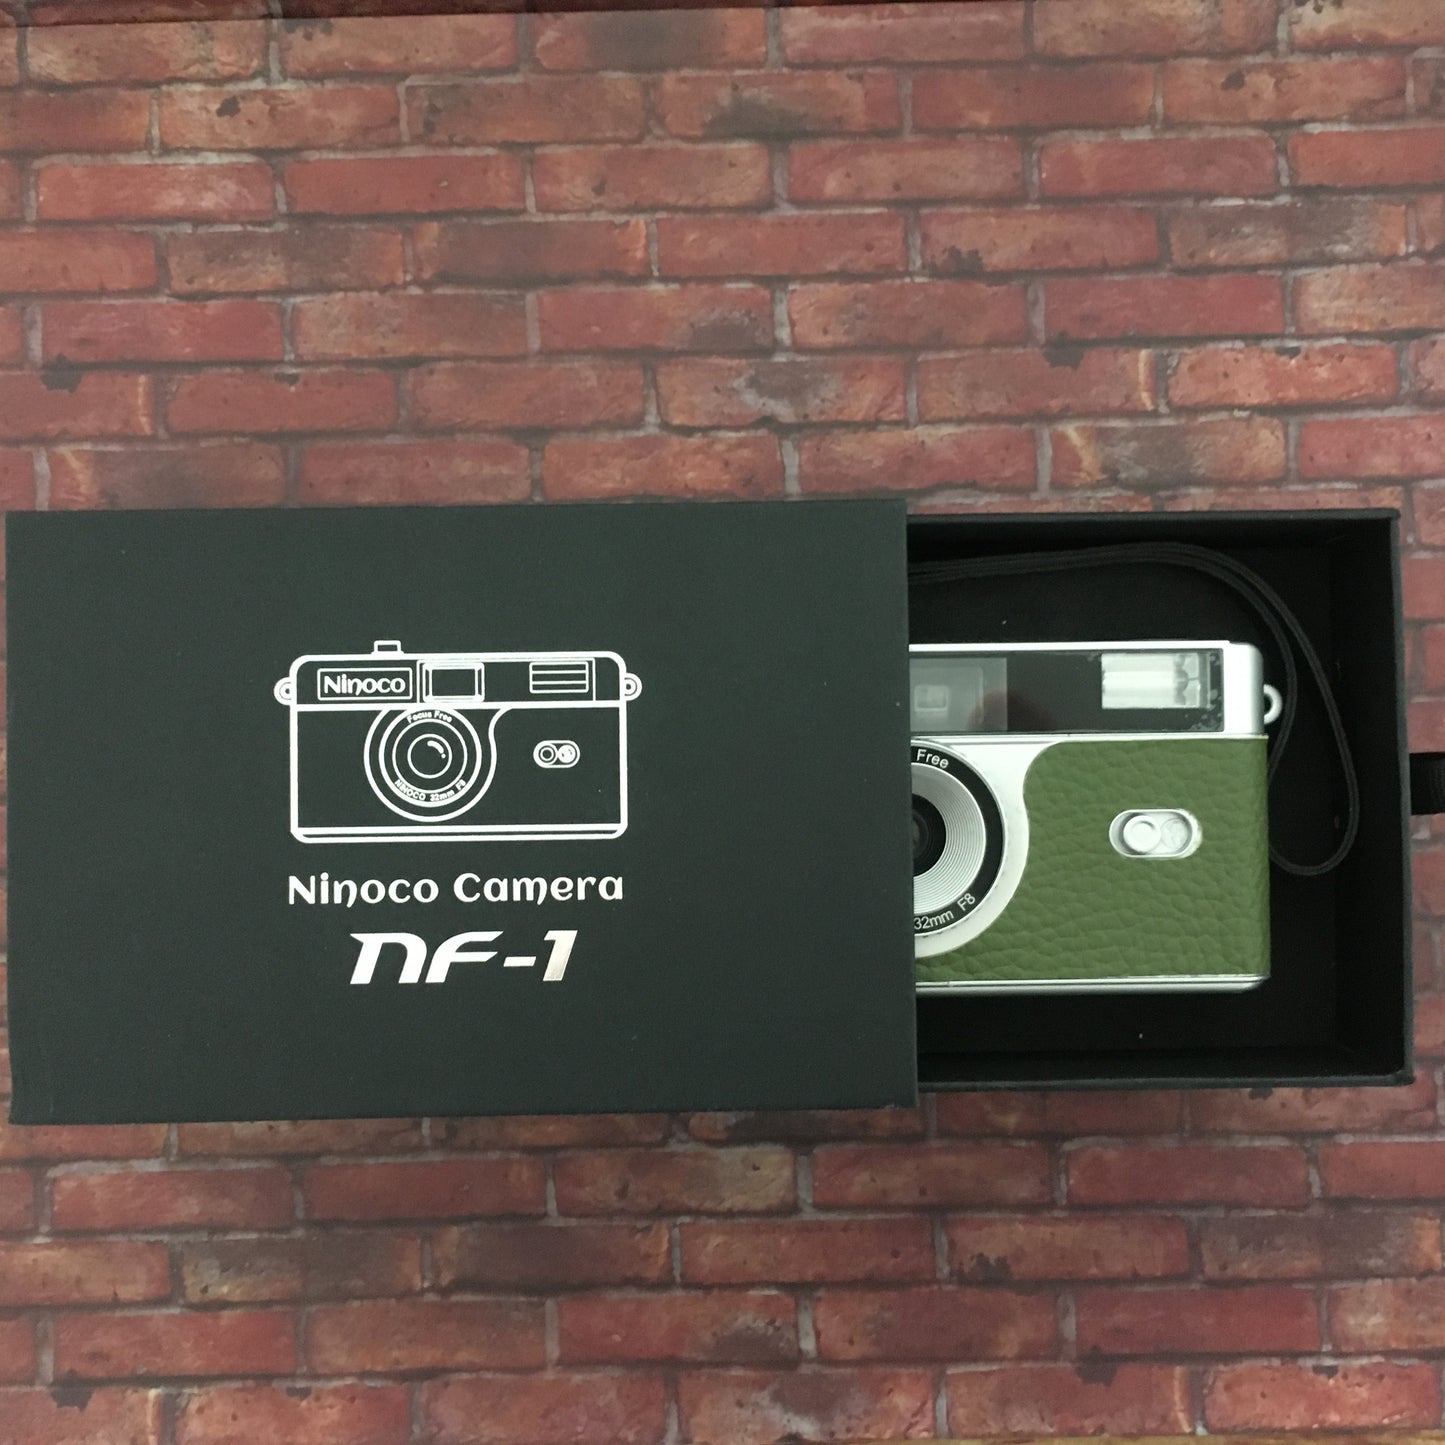 Point & shoot ! Brand new 35mm film camera with matcha green leather